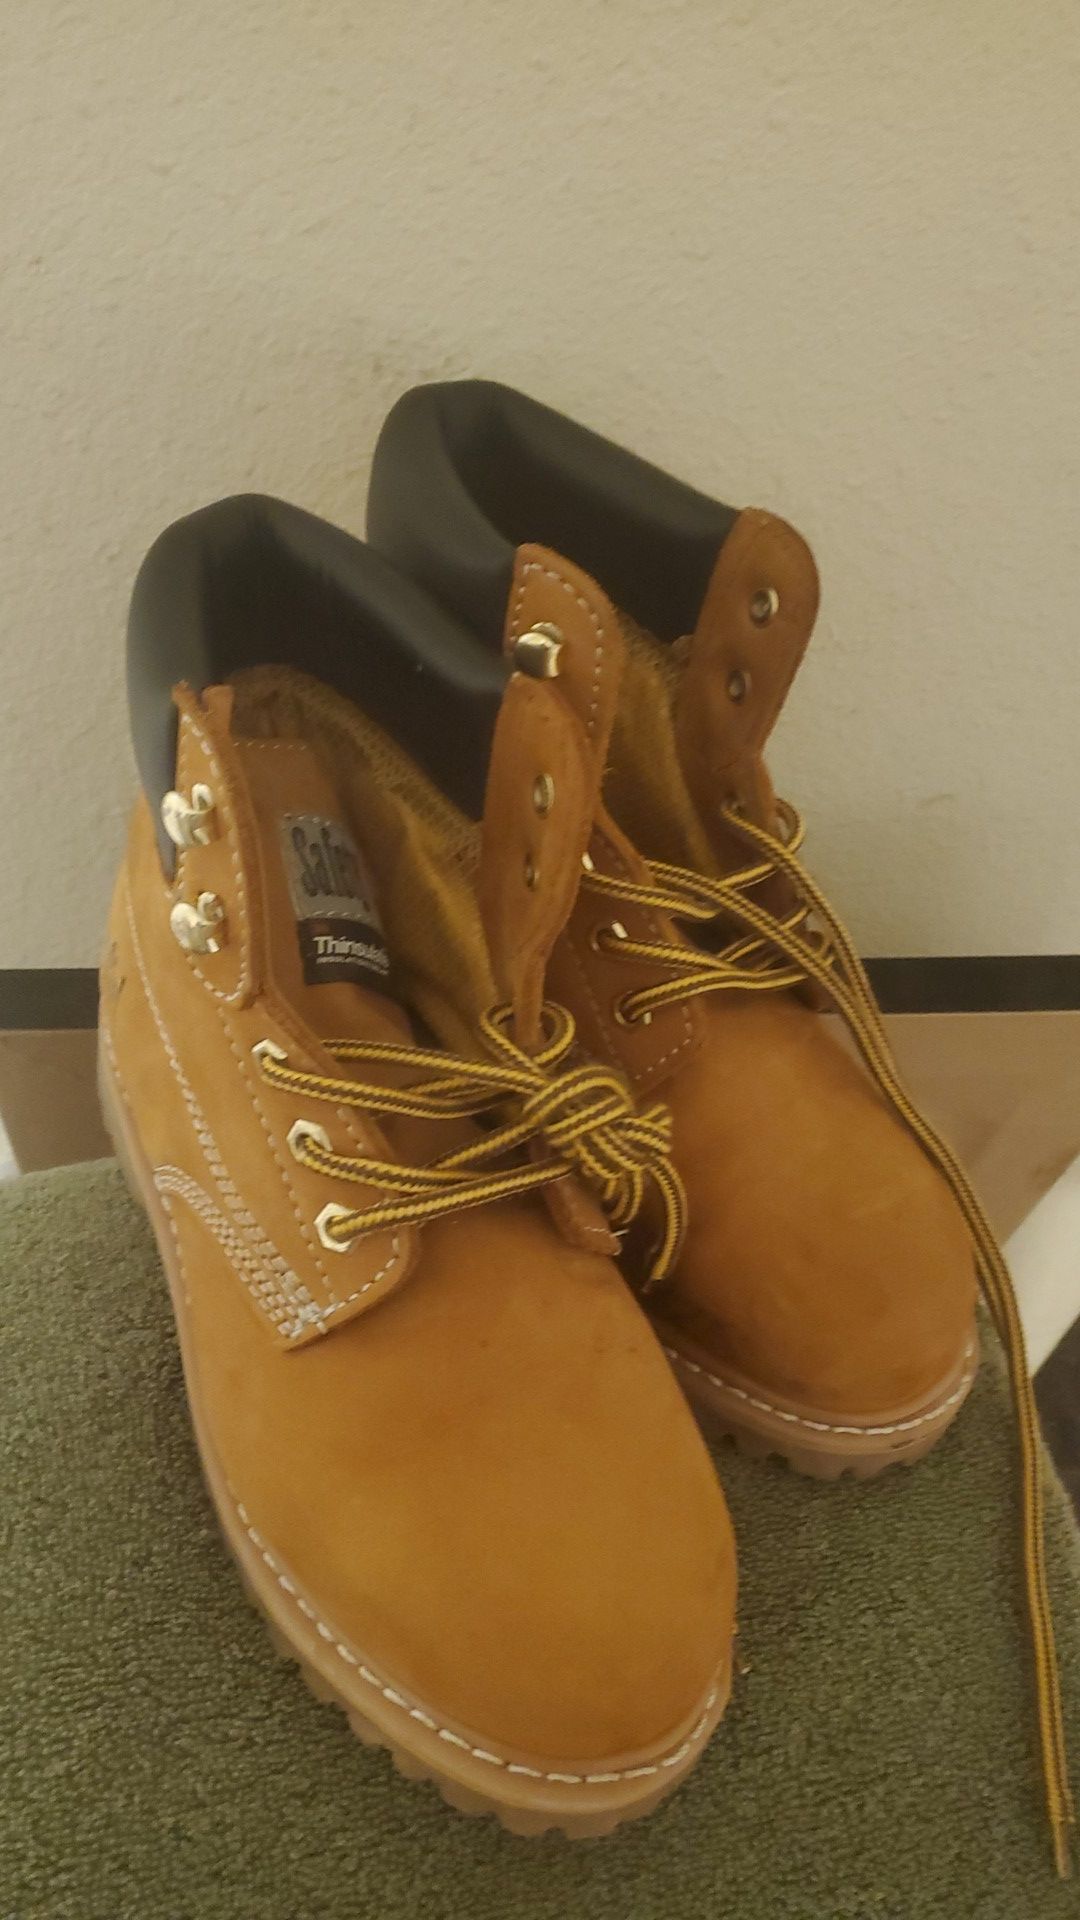 Safety girl size 6 work boots